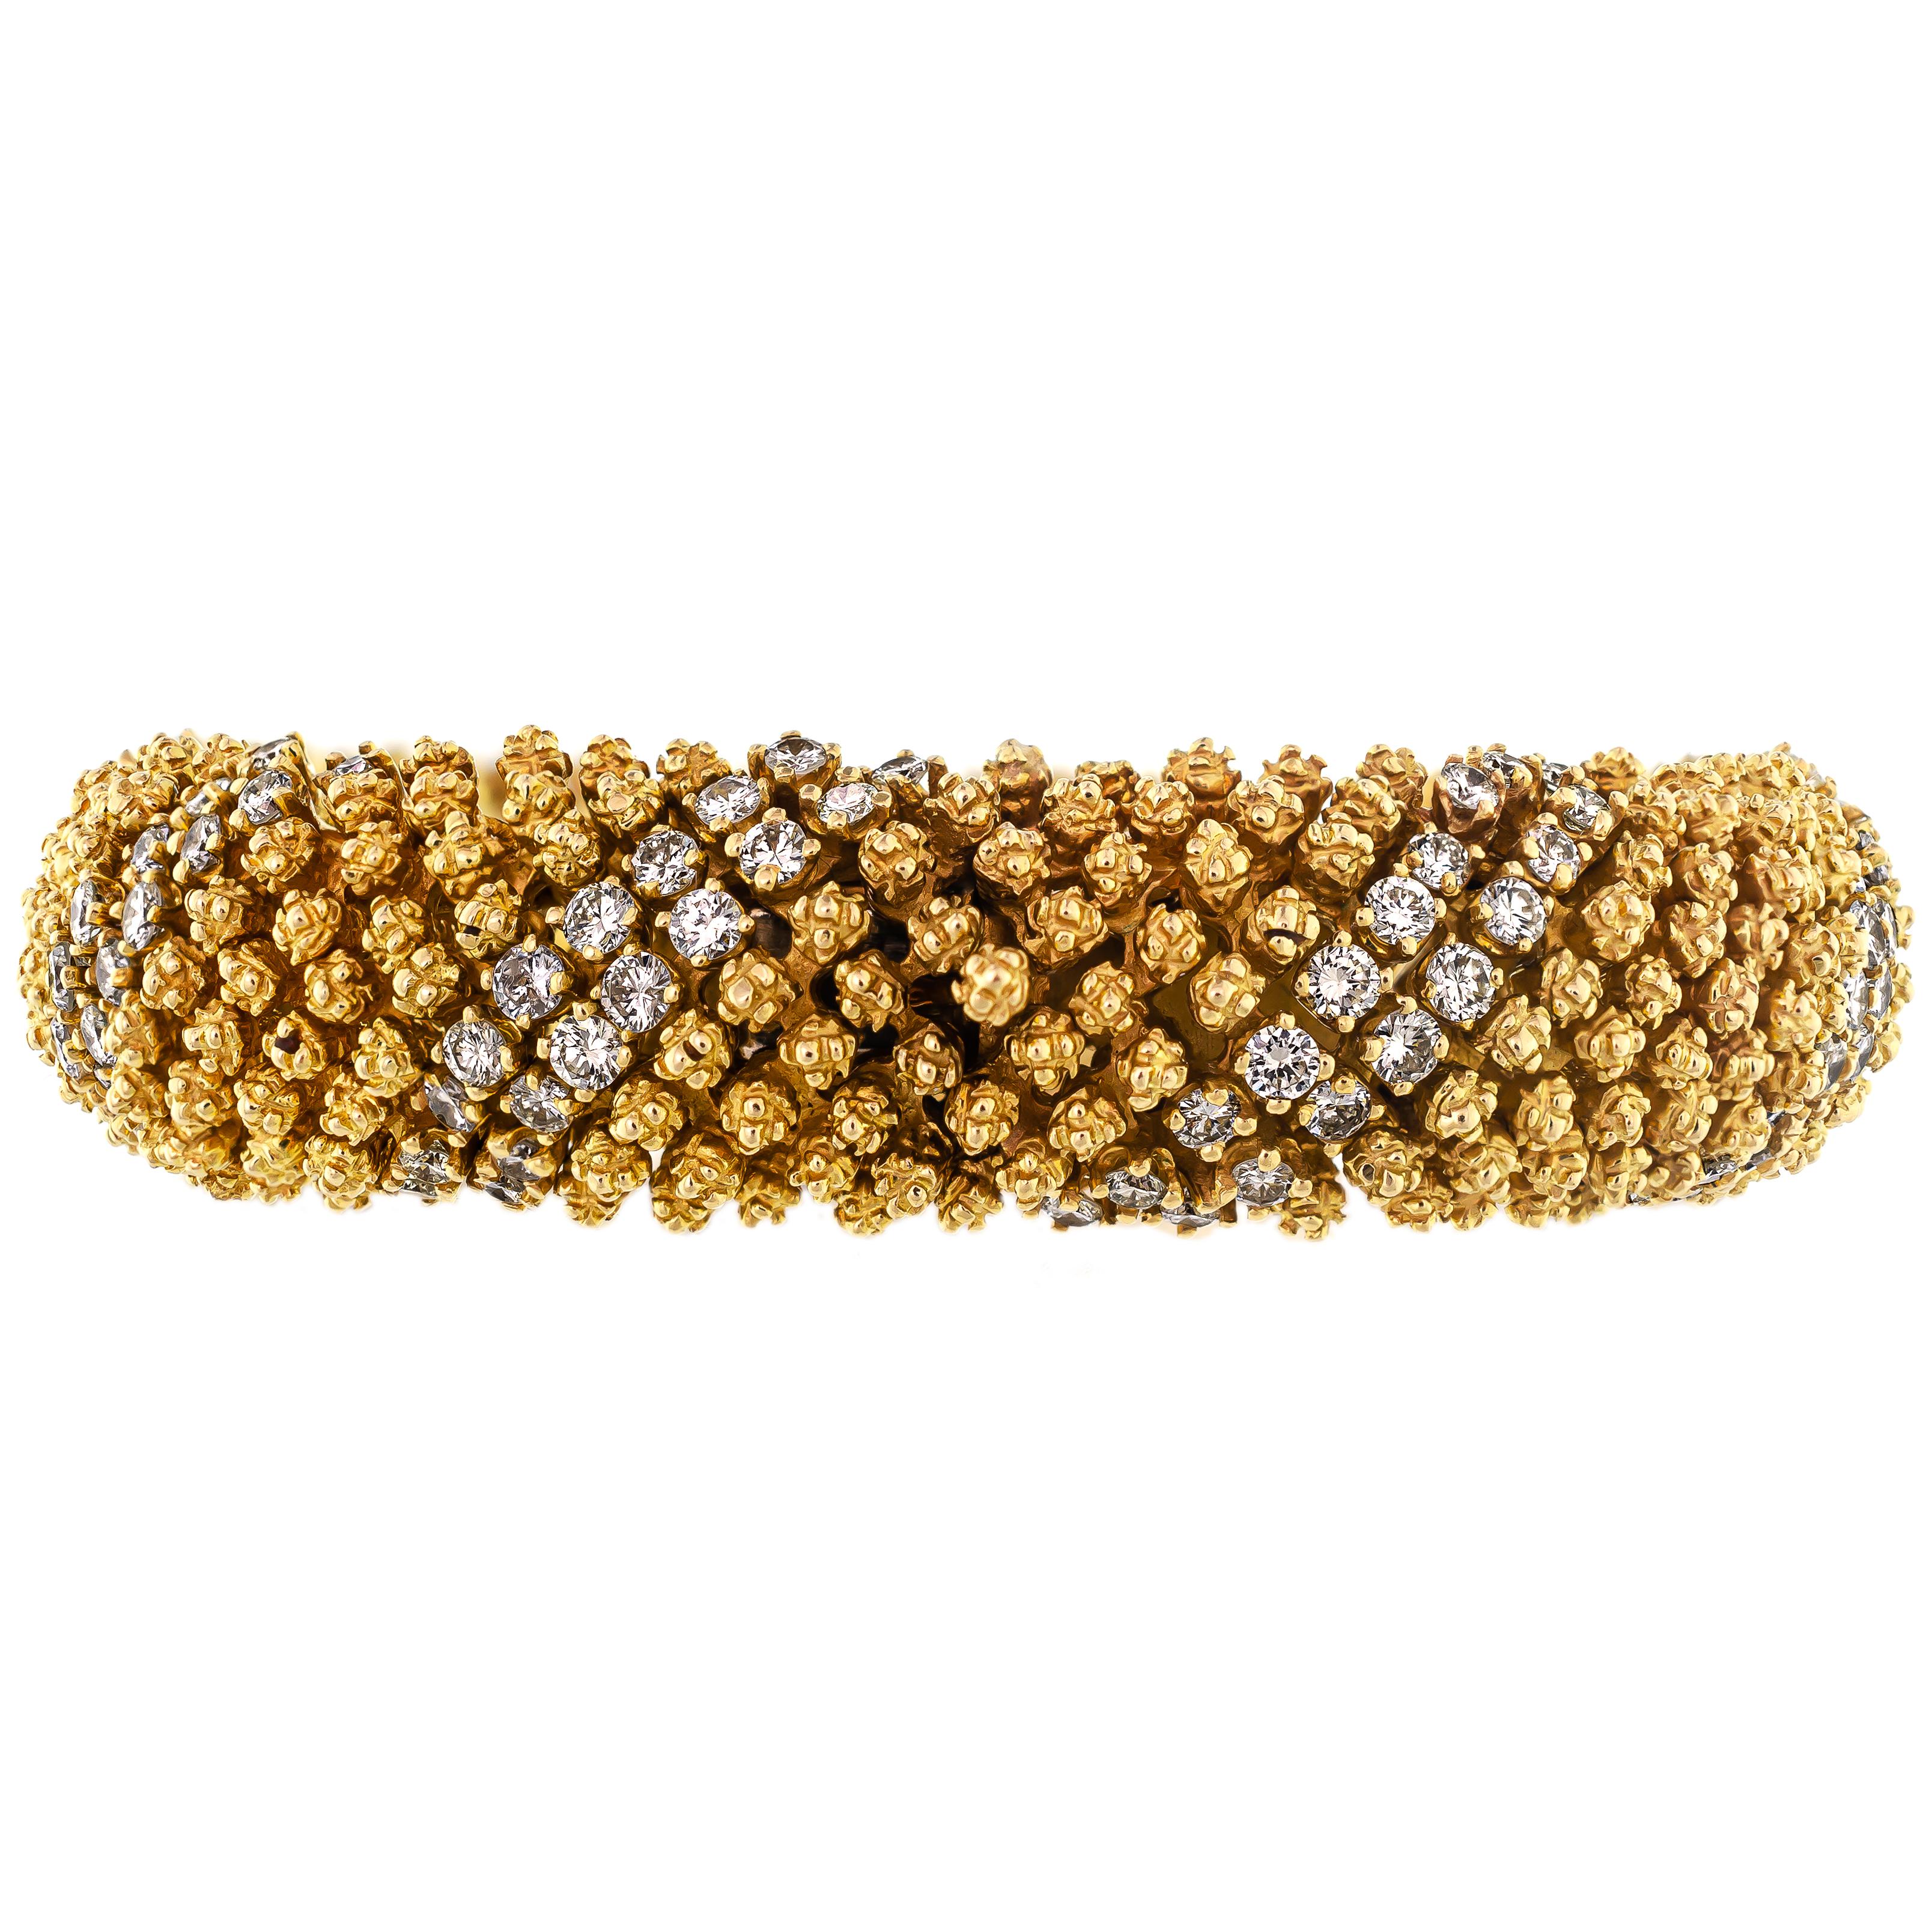 This fashionable diamond and 18 karat yellow gold Circa 1960s flexible gold and diamond bracelet is both artfully and meticulously crafted. The construction of this retro link bracelet is simply fascinating. Designed out of three-dimensional little